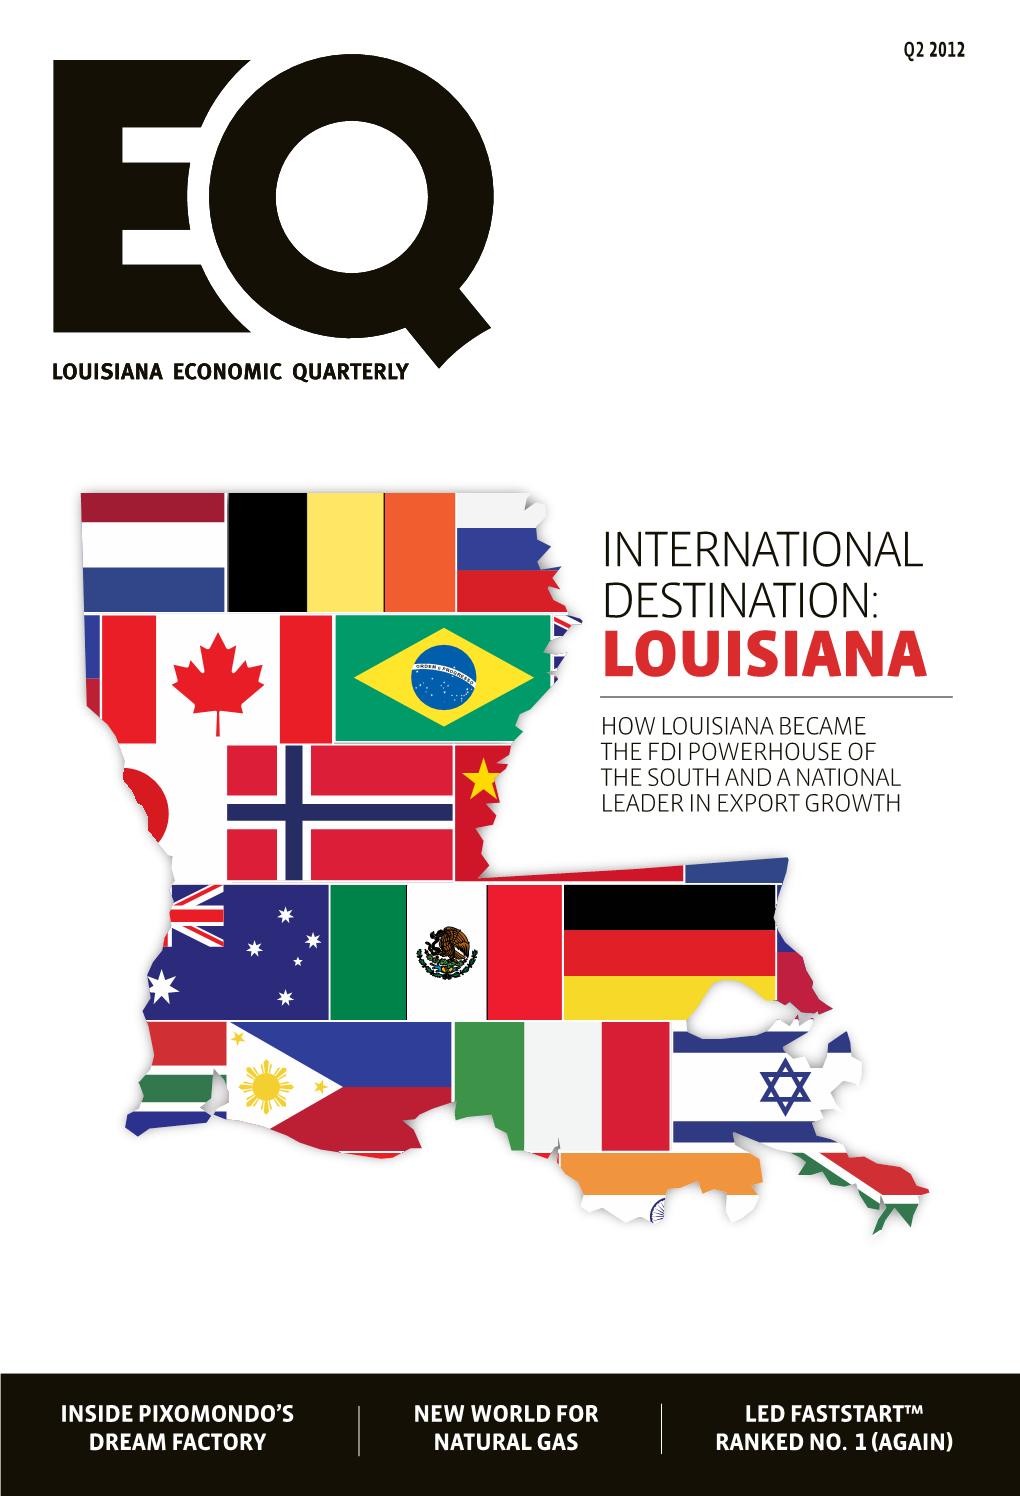 International Destination: Louisiana How Louisiana Became the Fdi Powerhouse of the South and a National Leader in Export Growth